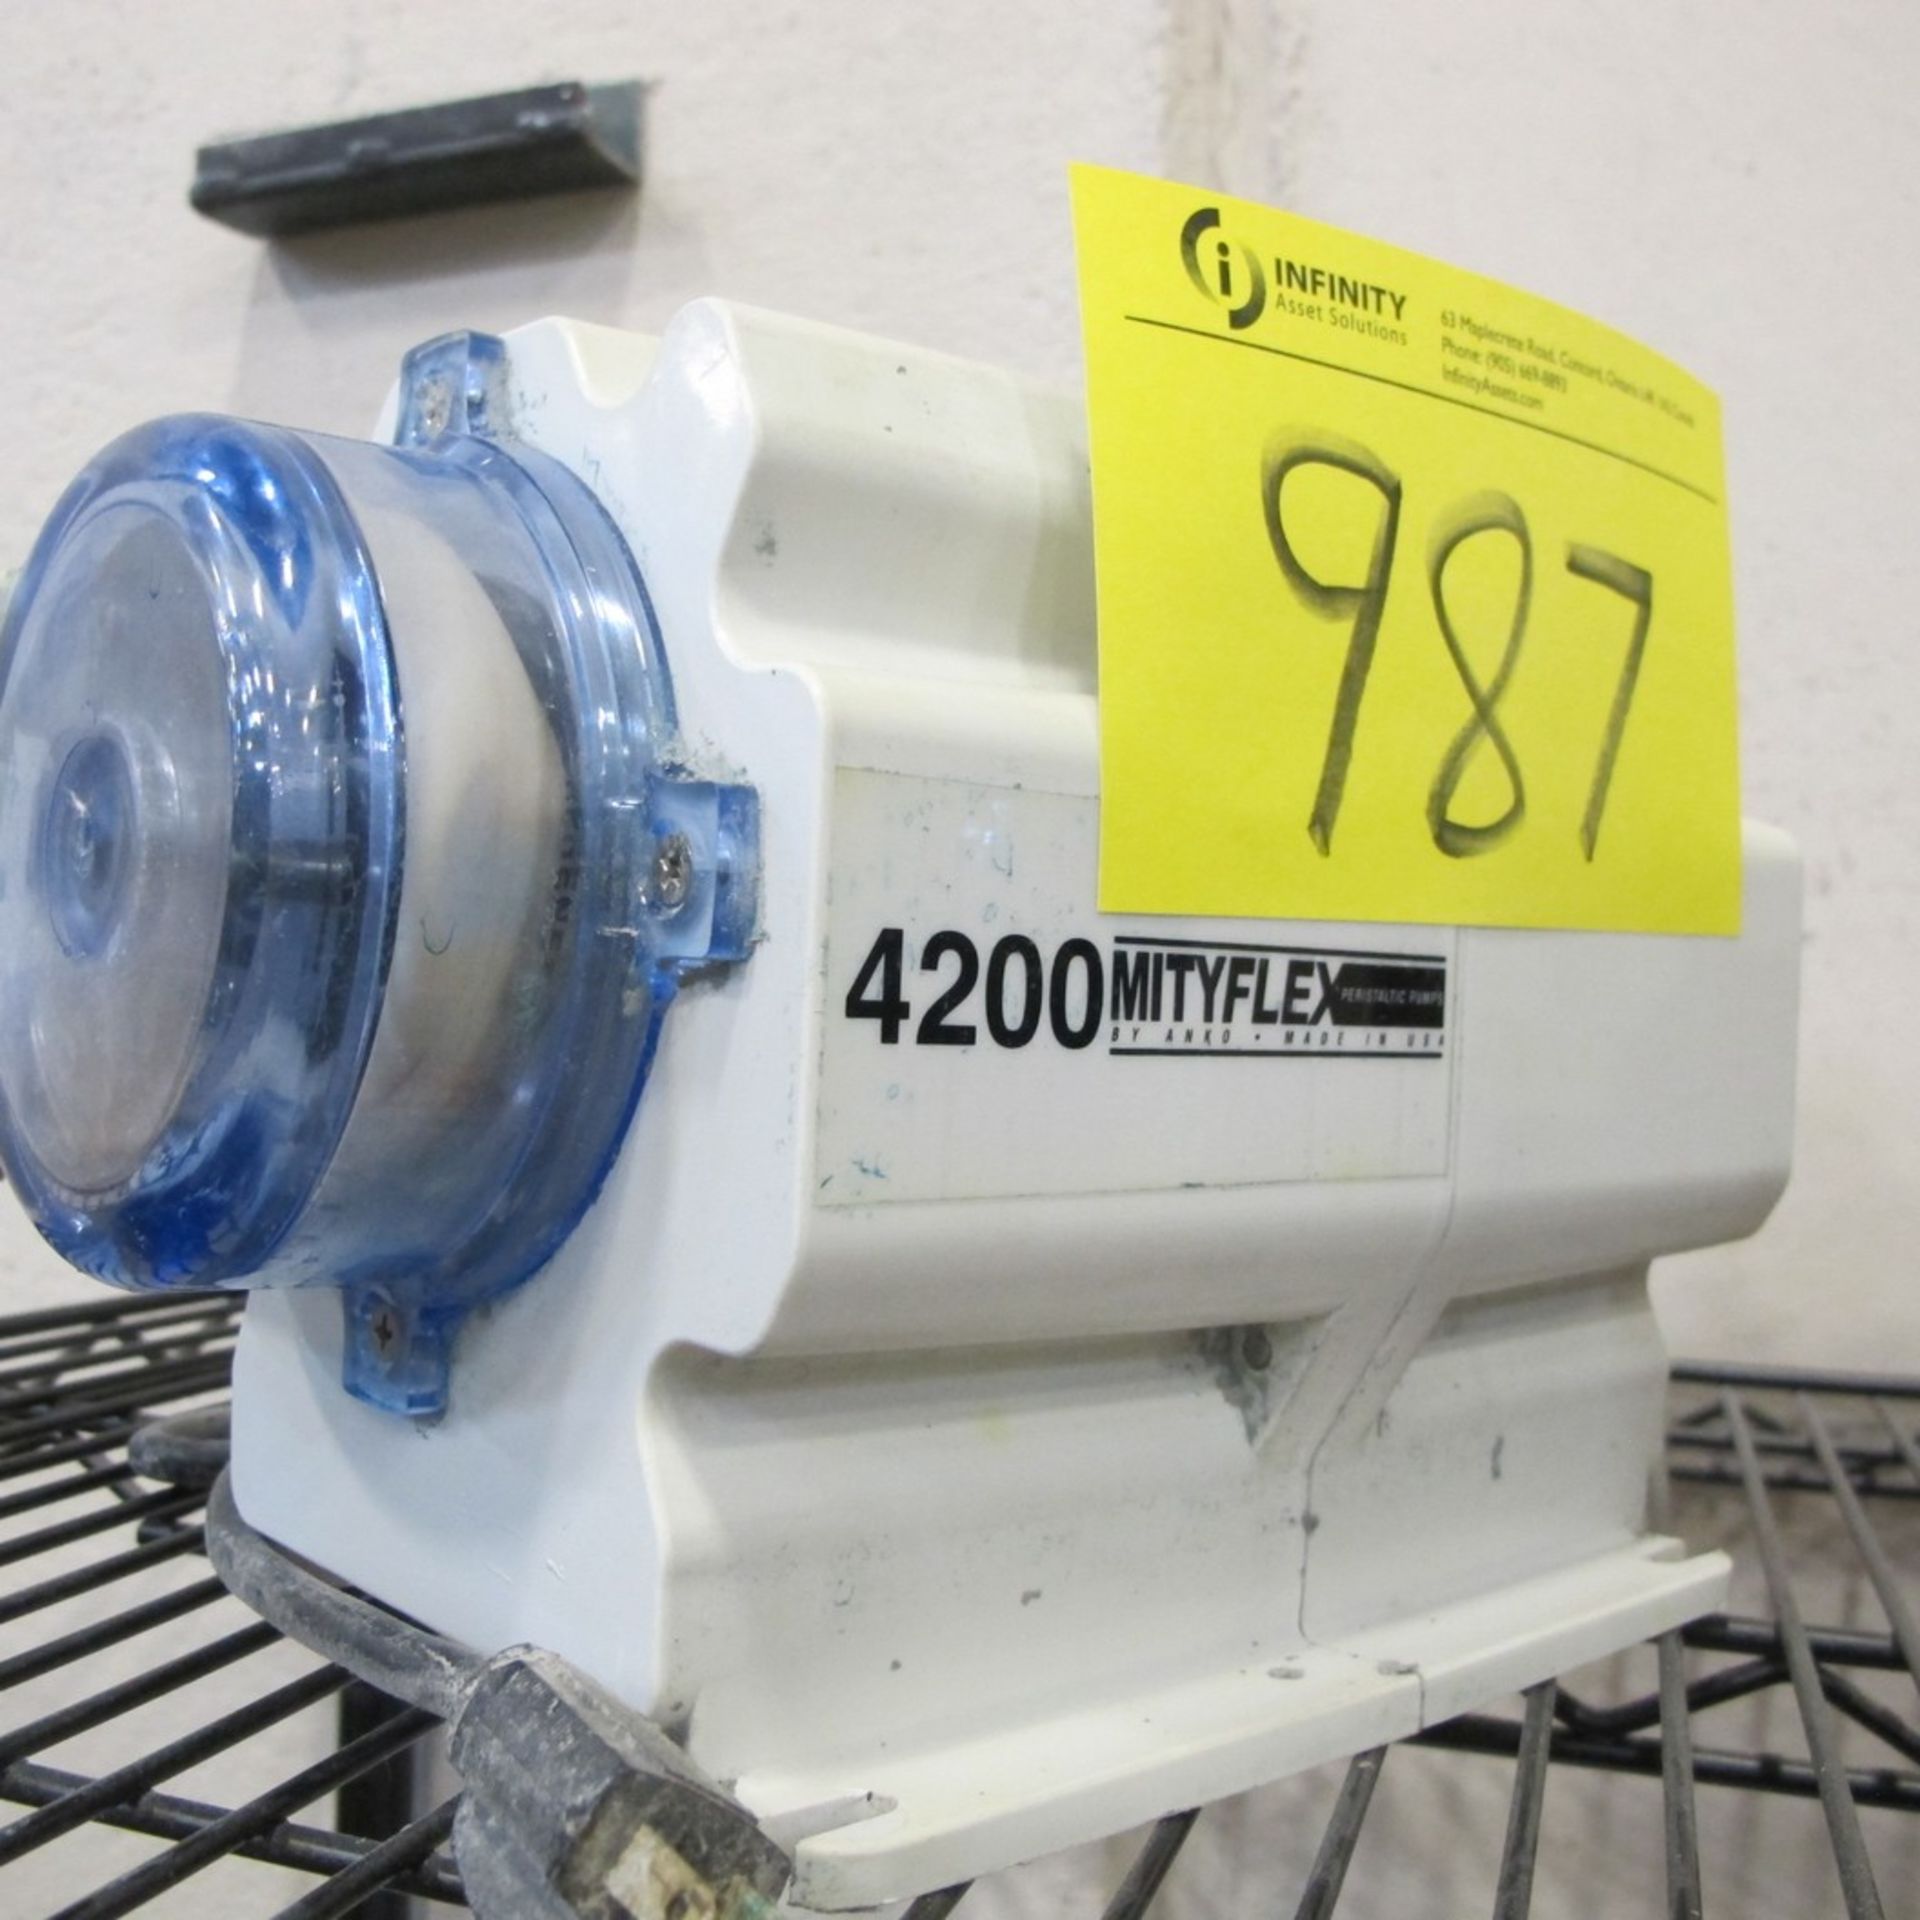 LOT OF (2) ANKO MITYFLEX 4200 PERISTALTIC PUMP W/ DIRECTIONAL CONTROLS (NORTH ELECTRICAL ROOM) - Image 2 of 5